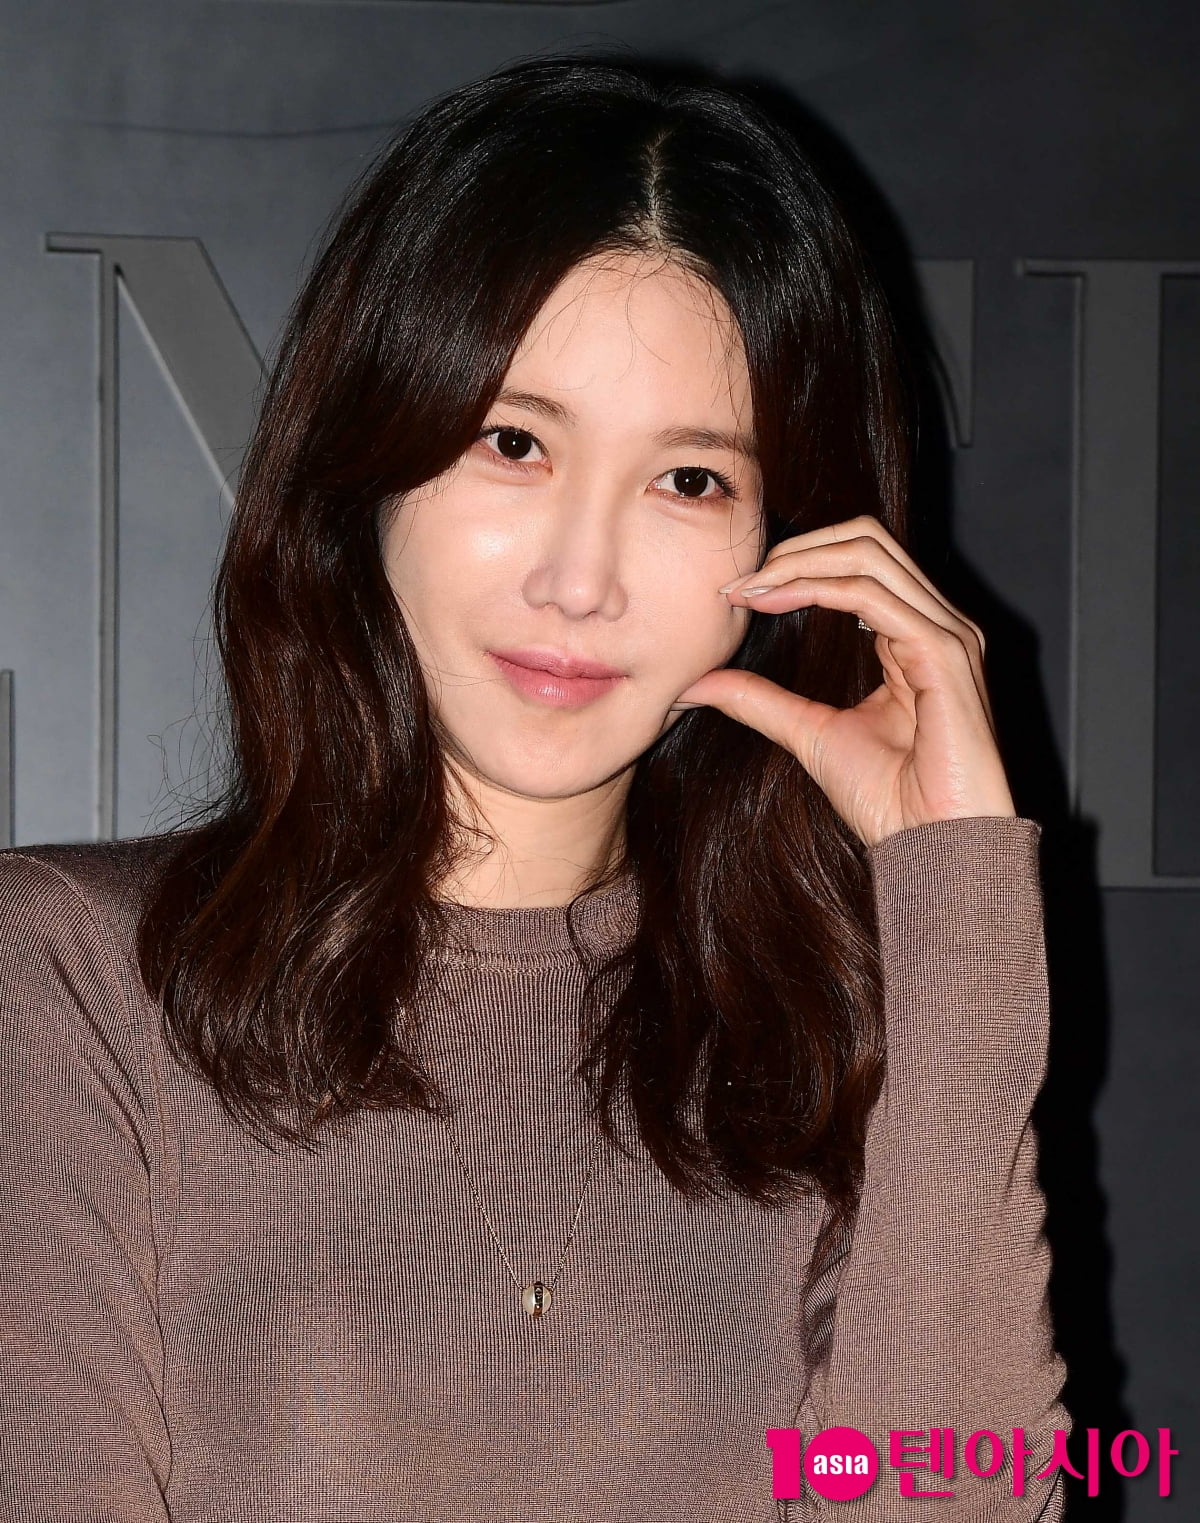 Should Lee Ji-ah get rid of the tiresome ‘controversy over her acting skills’ label?